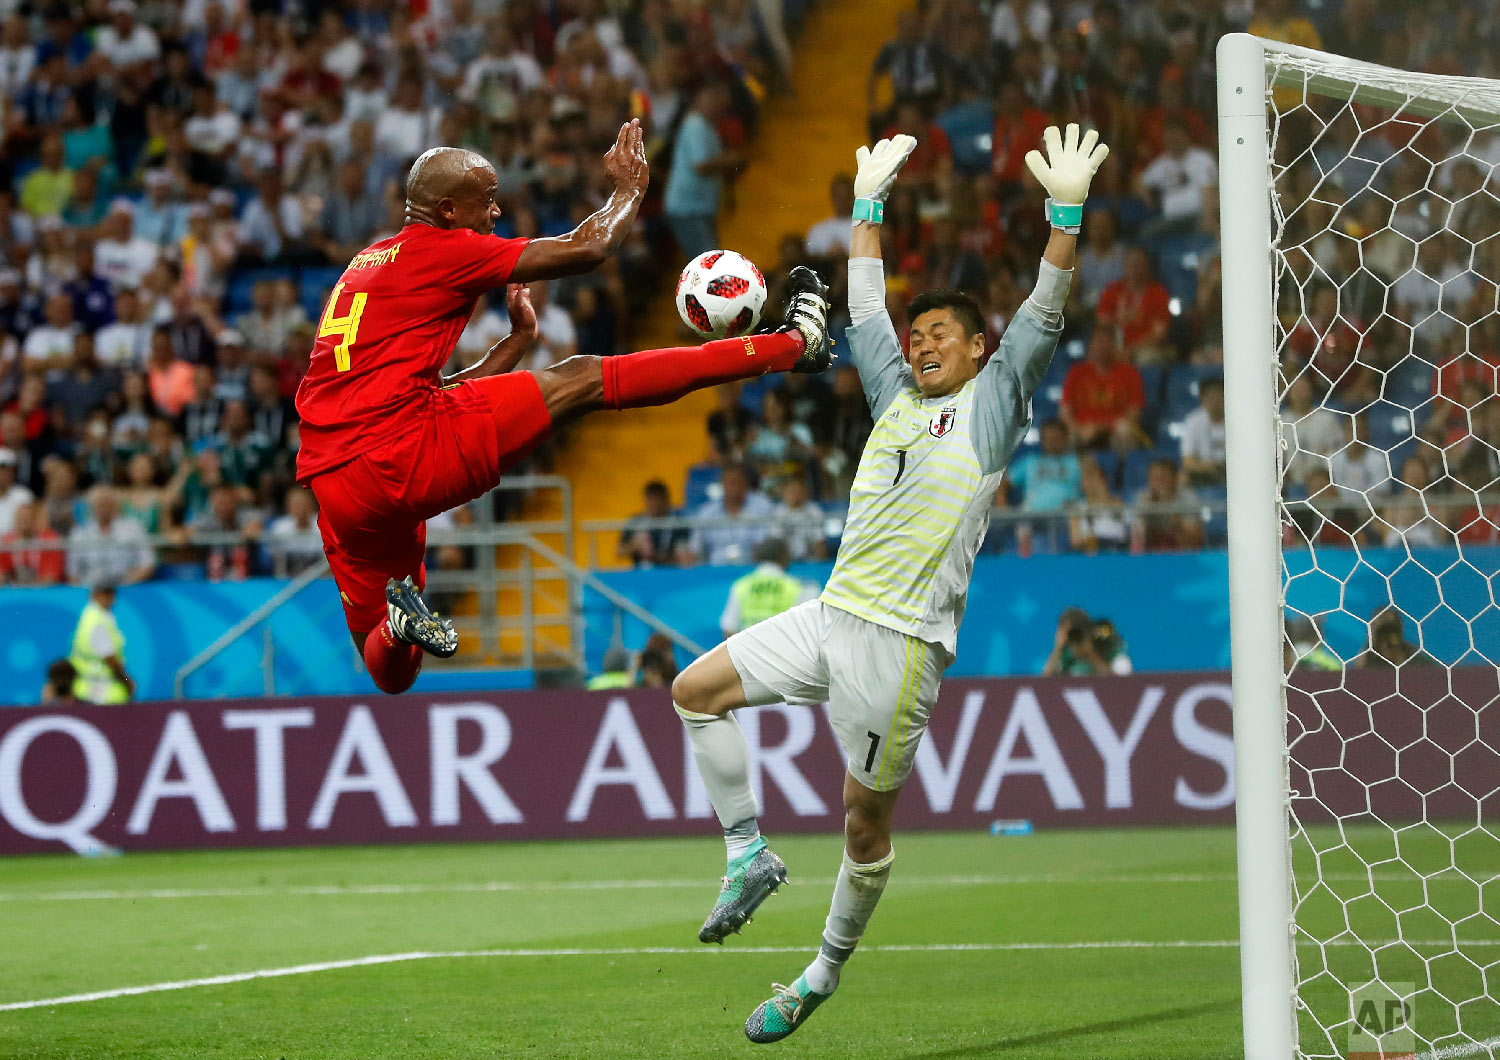  Belgium's Vincent Kompany jumps for the ball in front of Japan goalkeeper Eiji Kawashima during the round of 16 match between Belgium and Japan at the 2018 soccer World Cup in the Rostov Arena, in Rostov-on-Don, Russia on July 2, 2018. (AP Photo/Pet